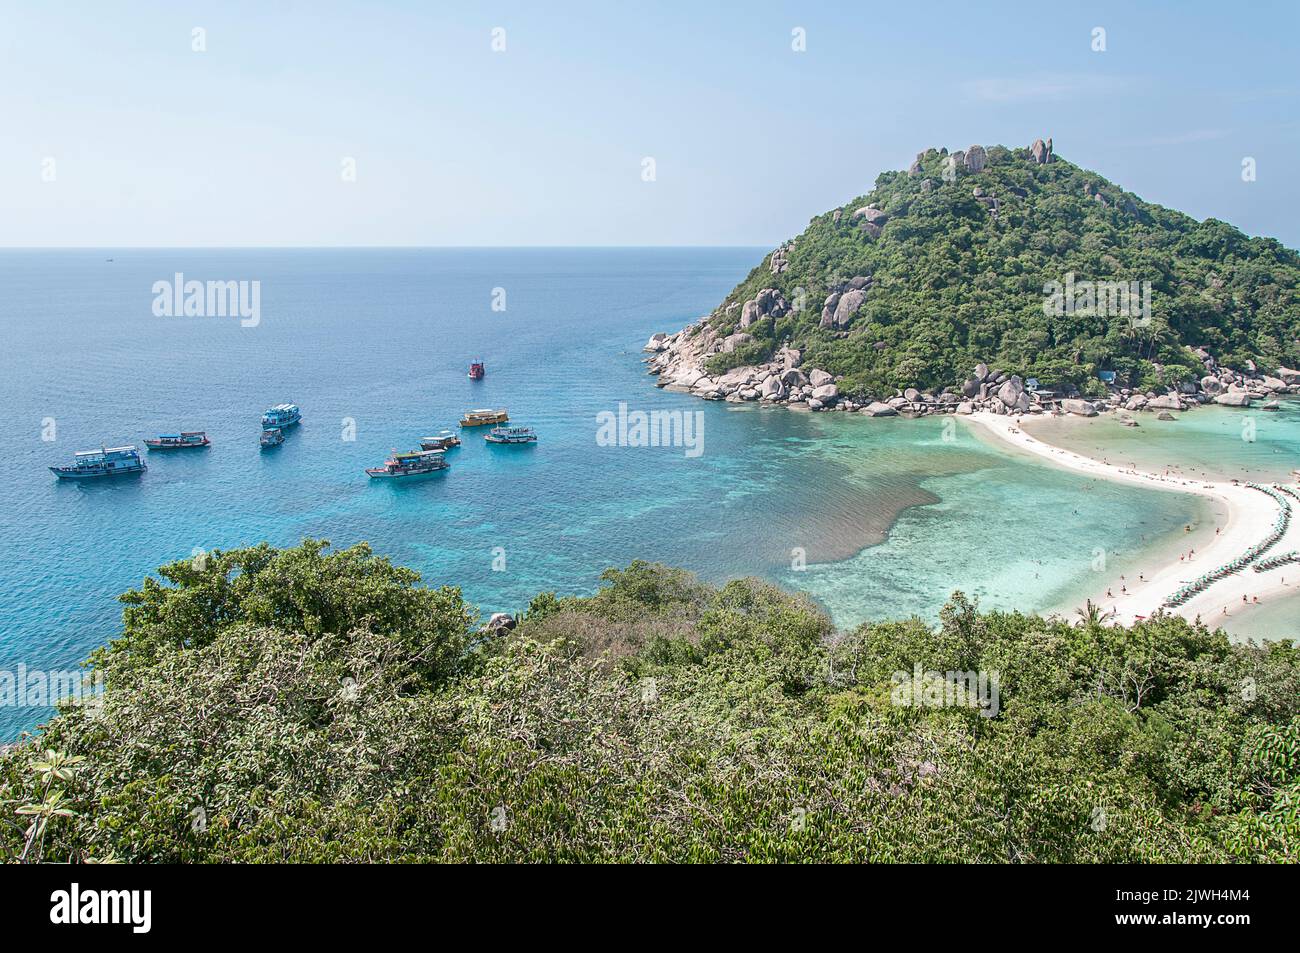 Aerial view of paradise islands with lots of vegetation in the gulf of Thailand. Koh Nang Yuan Island. There is a small sand road linking the two isla Stock Photo